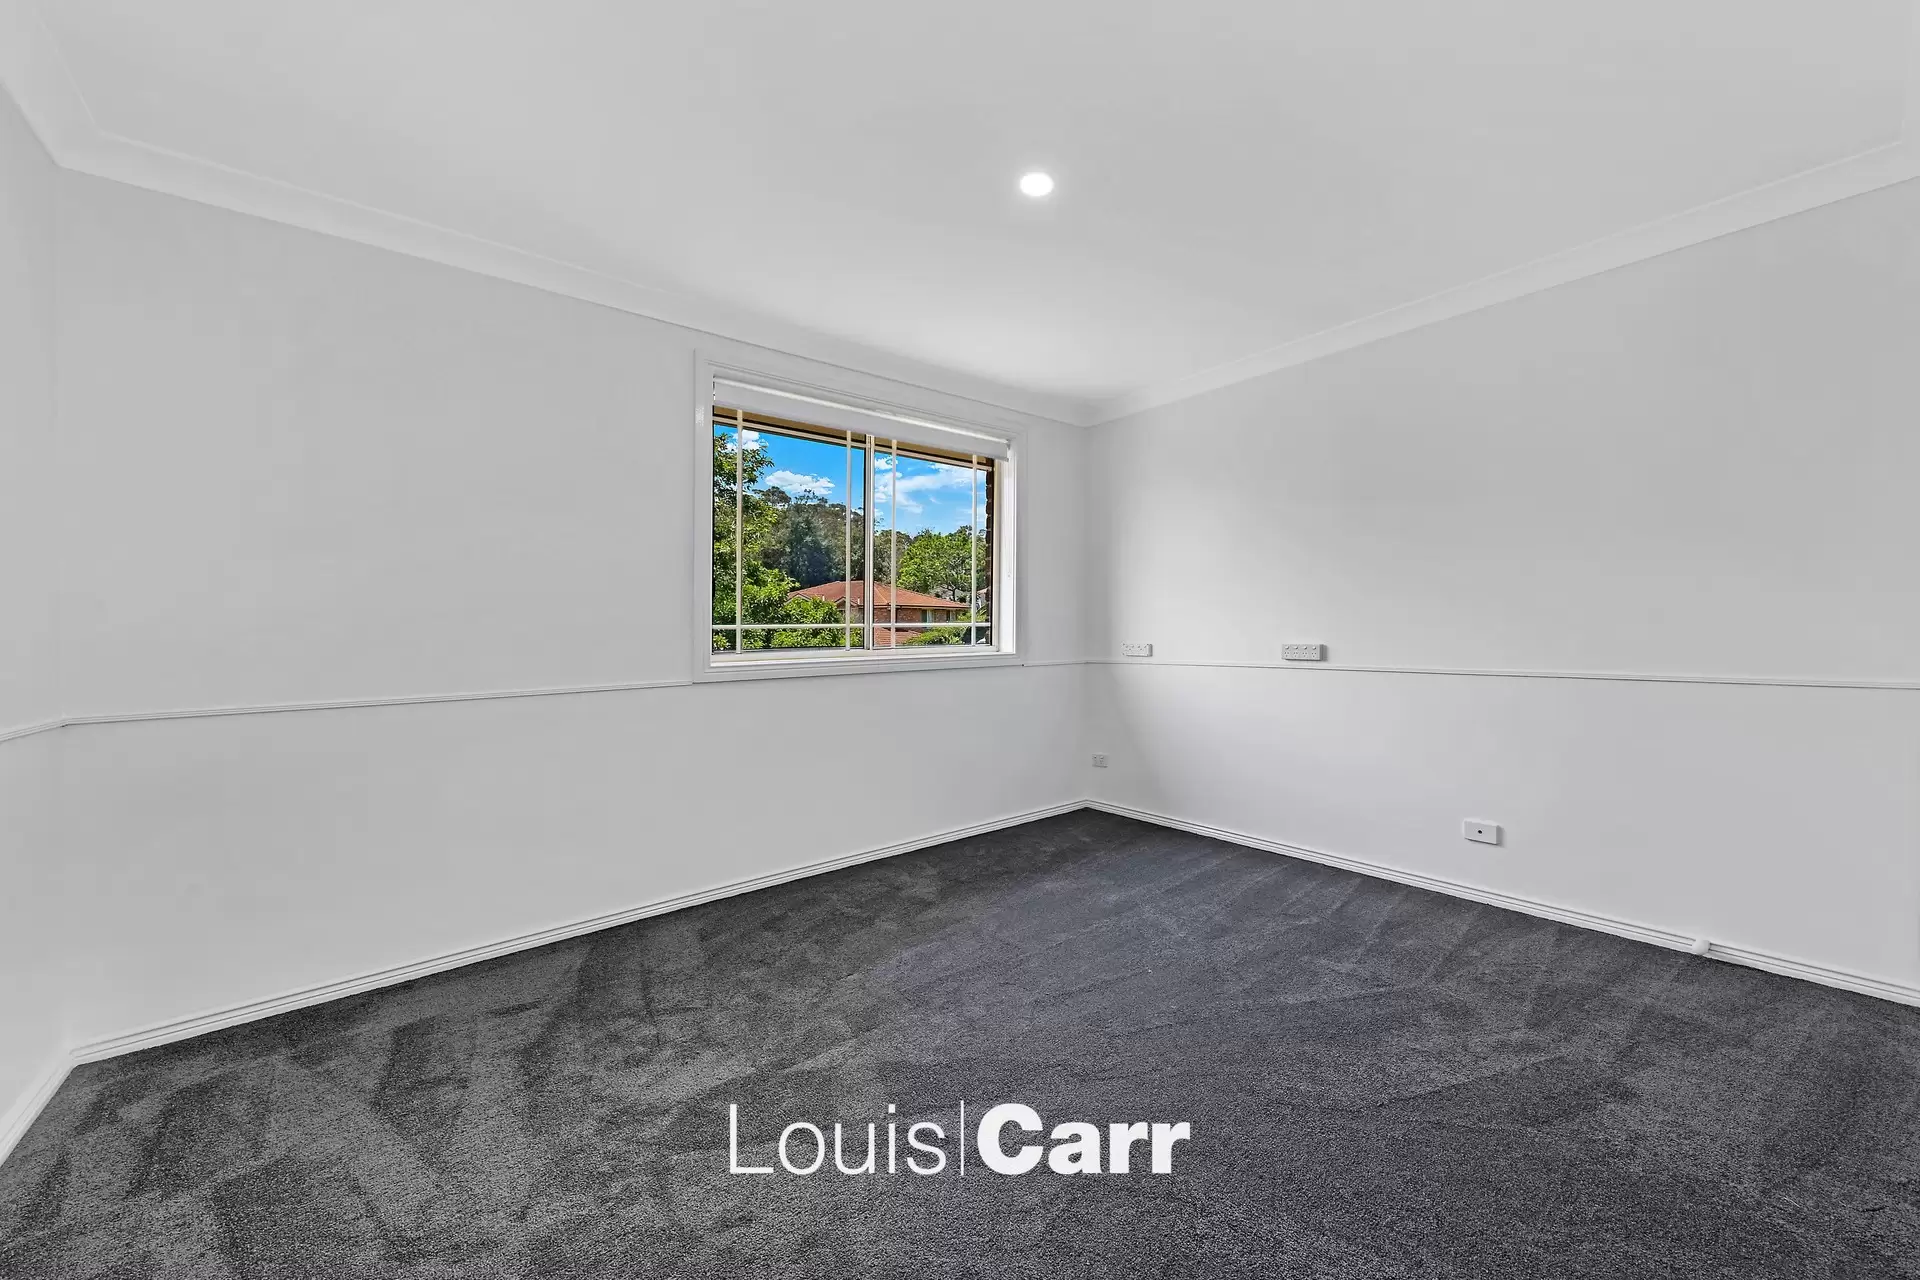 Photo #11: 4 Kingussie Avenue, Castle Hill - Sold by Louis Carr Real Estate